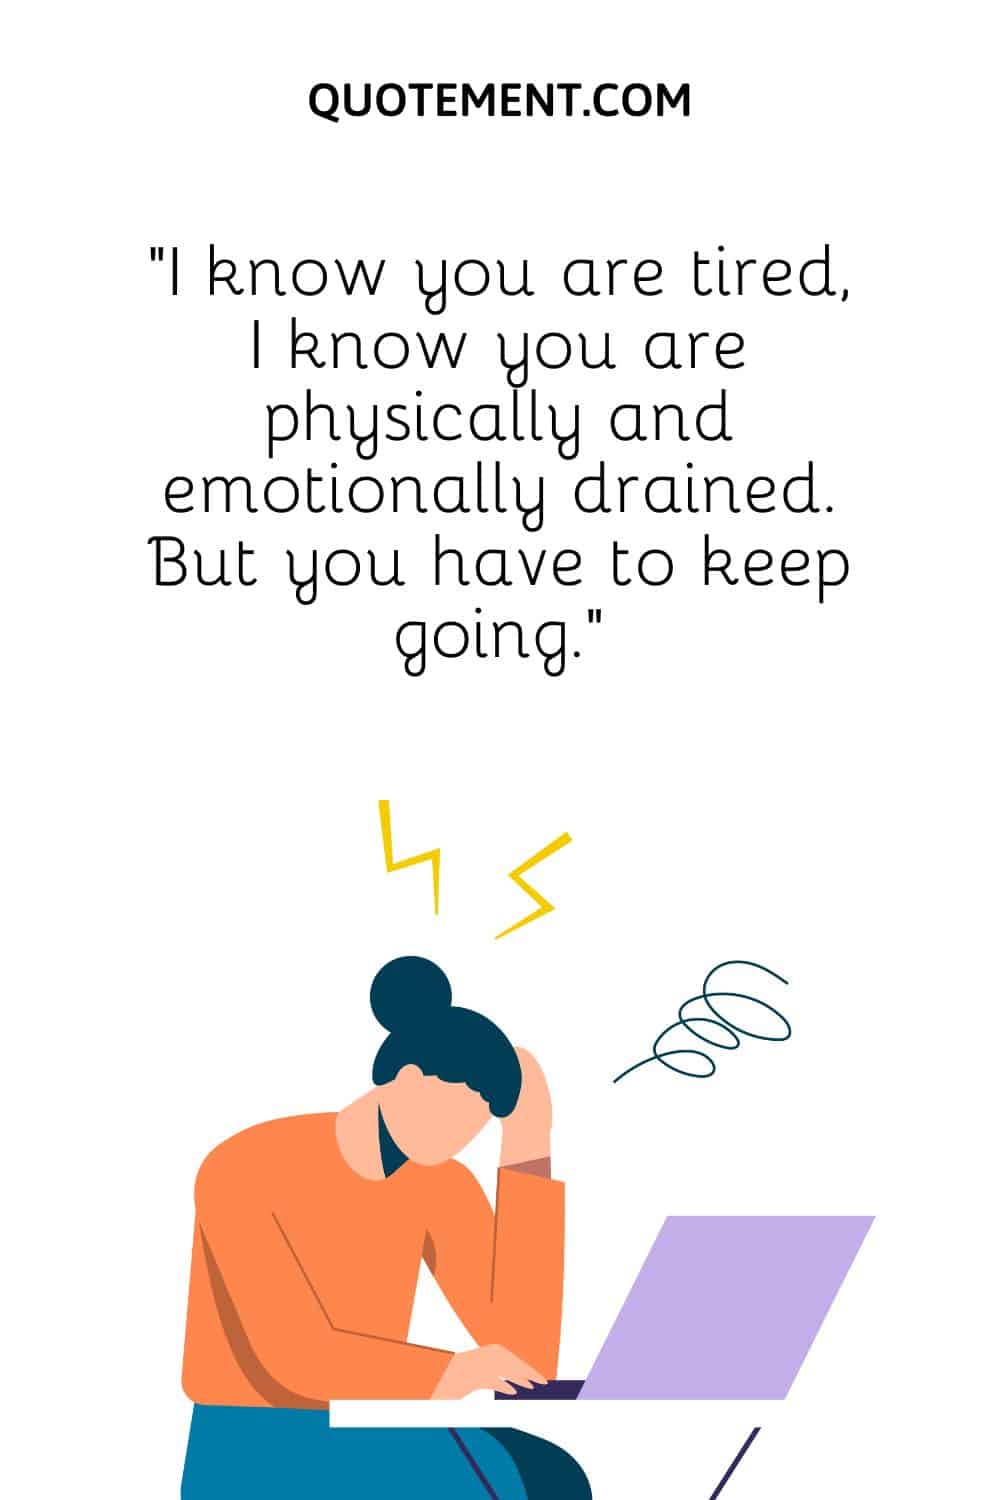 I know you are tired